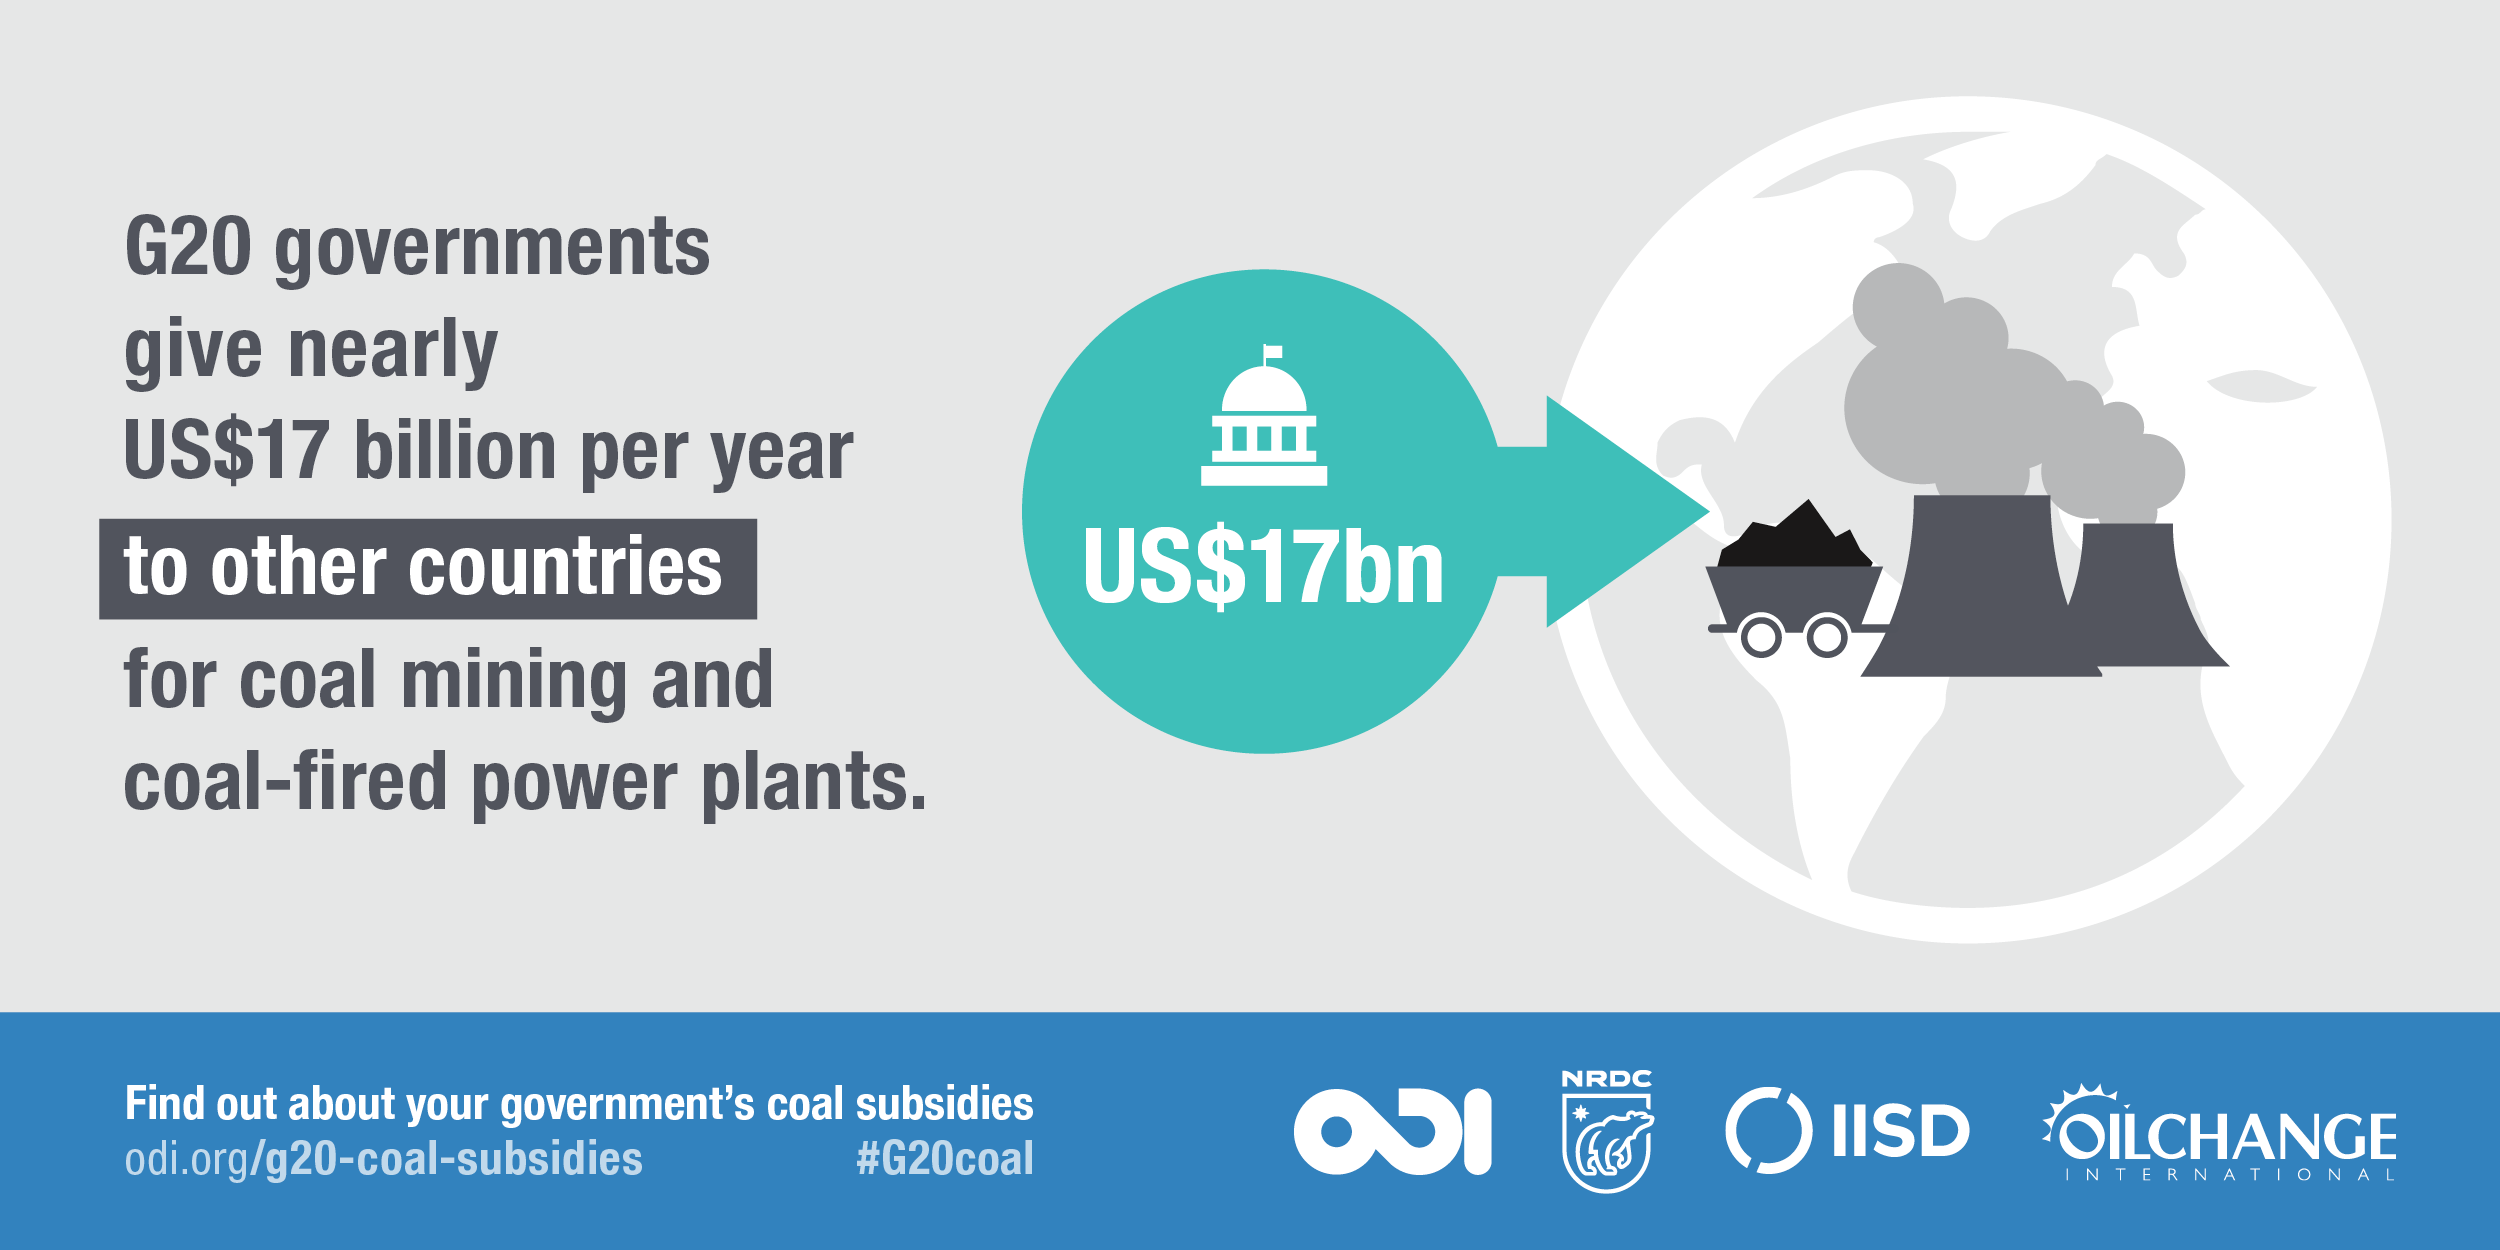 G20 governments give nearly US$17billion per year to other countries for coal mining and coal-fired power plants. Image: ODI